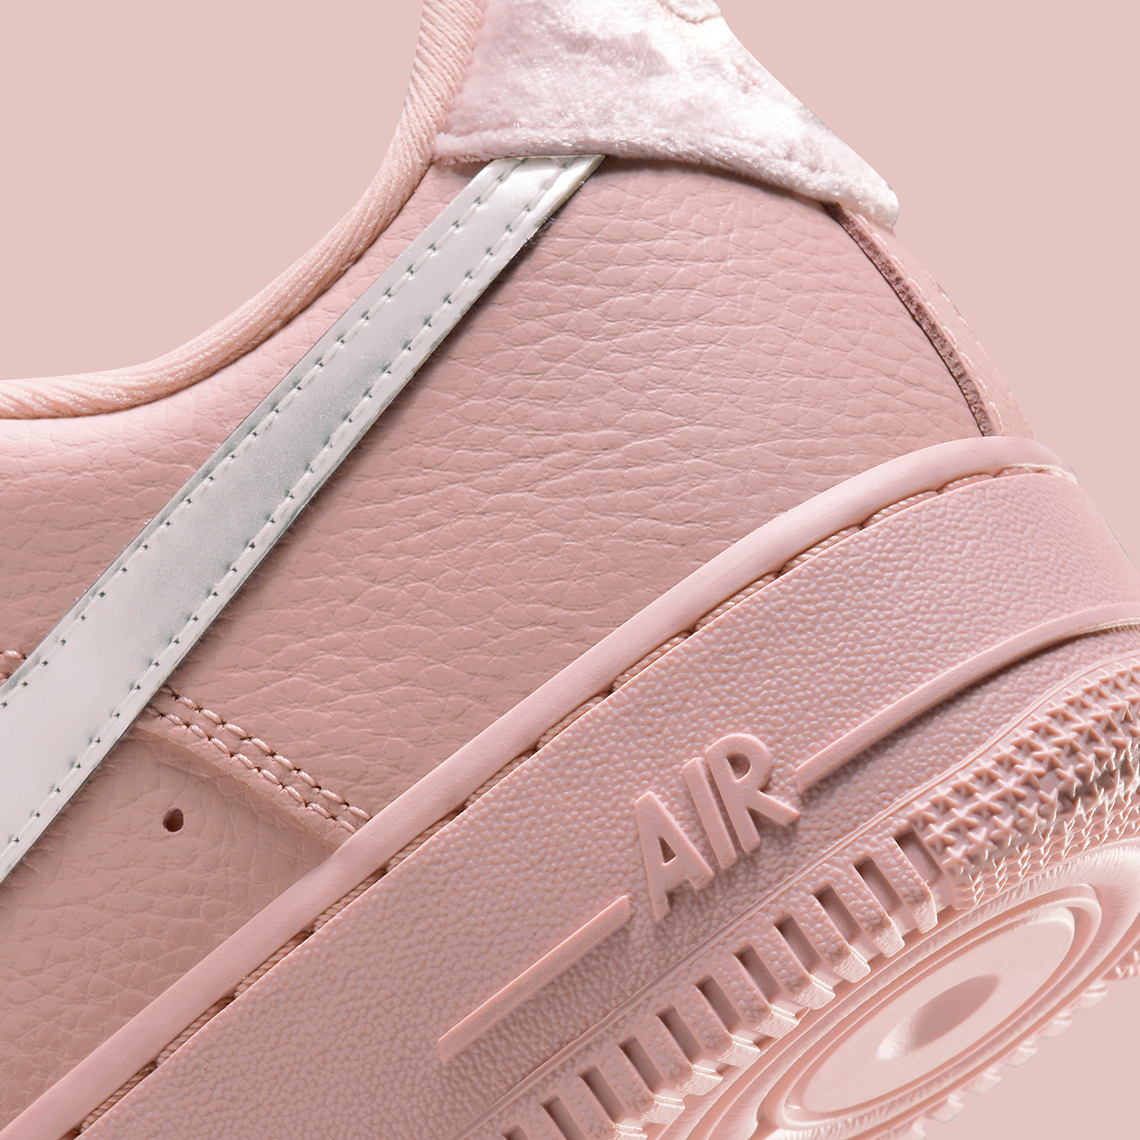 pink fuzzy air force 1